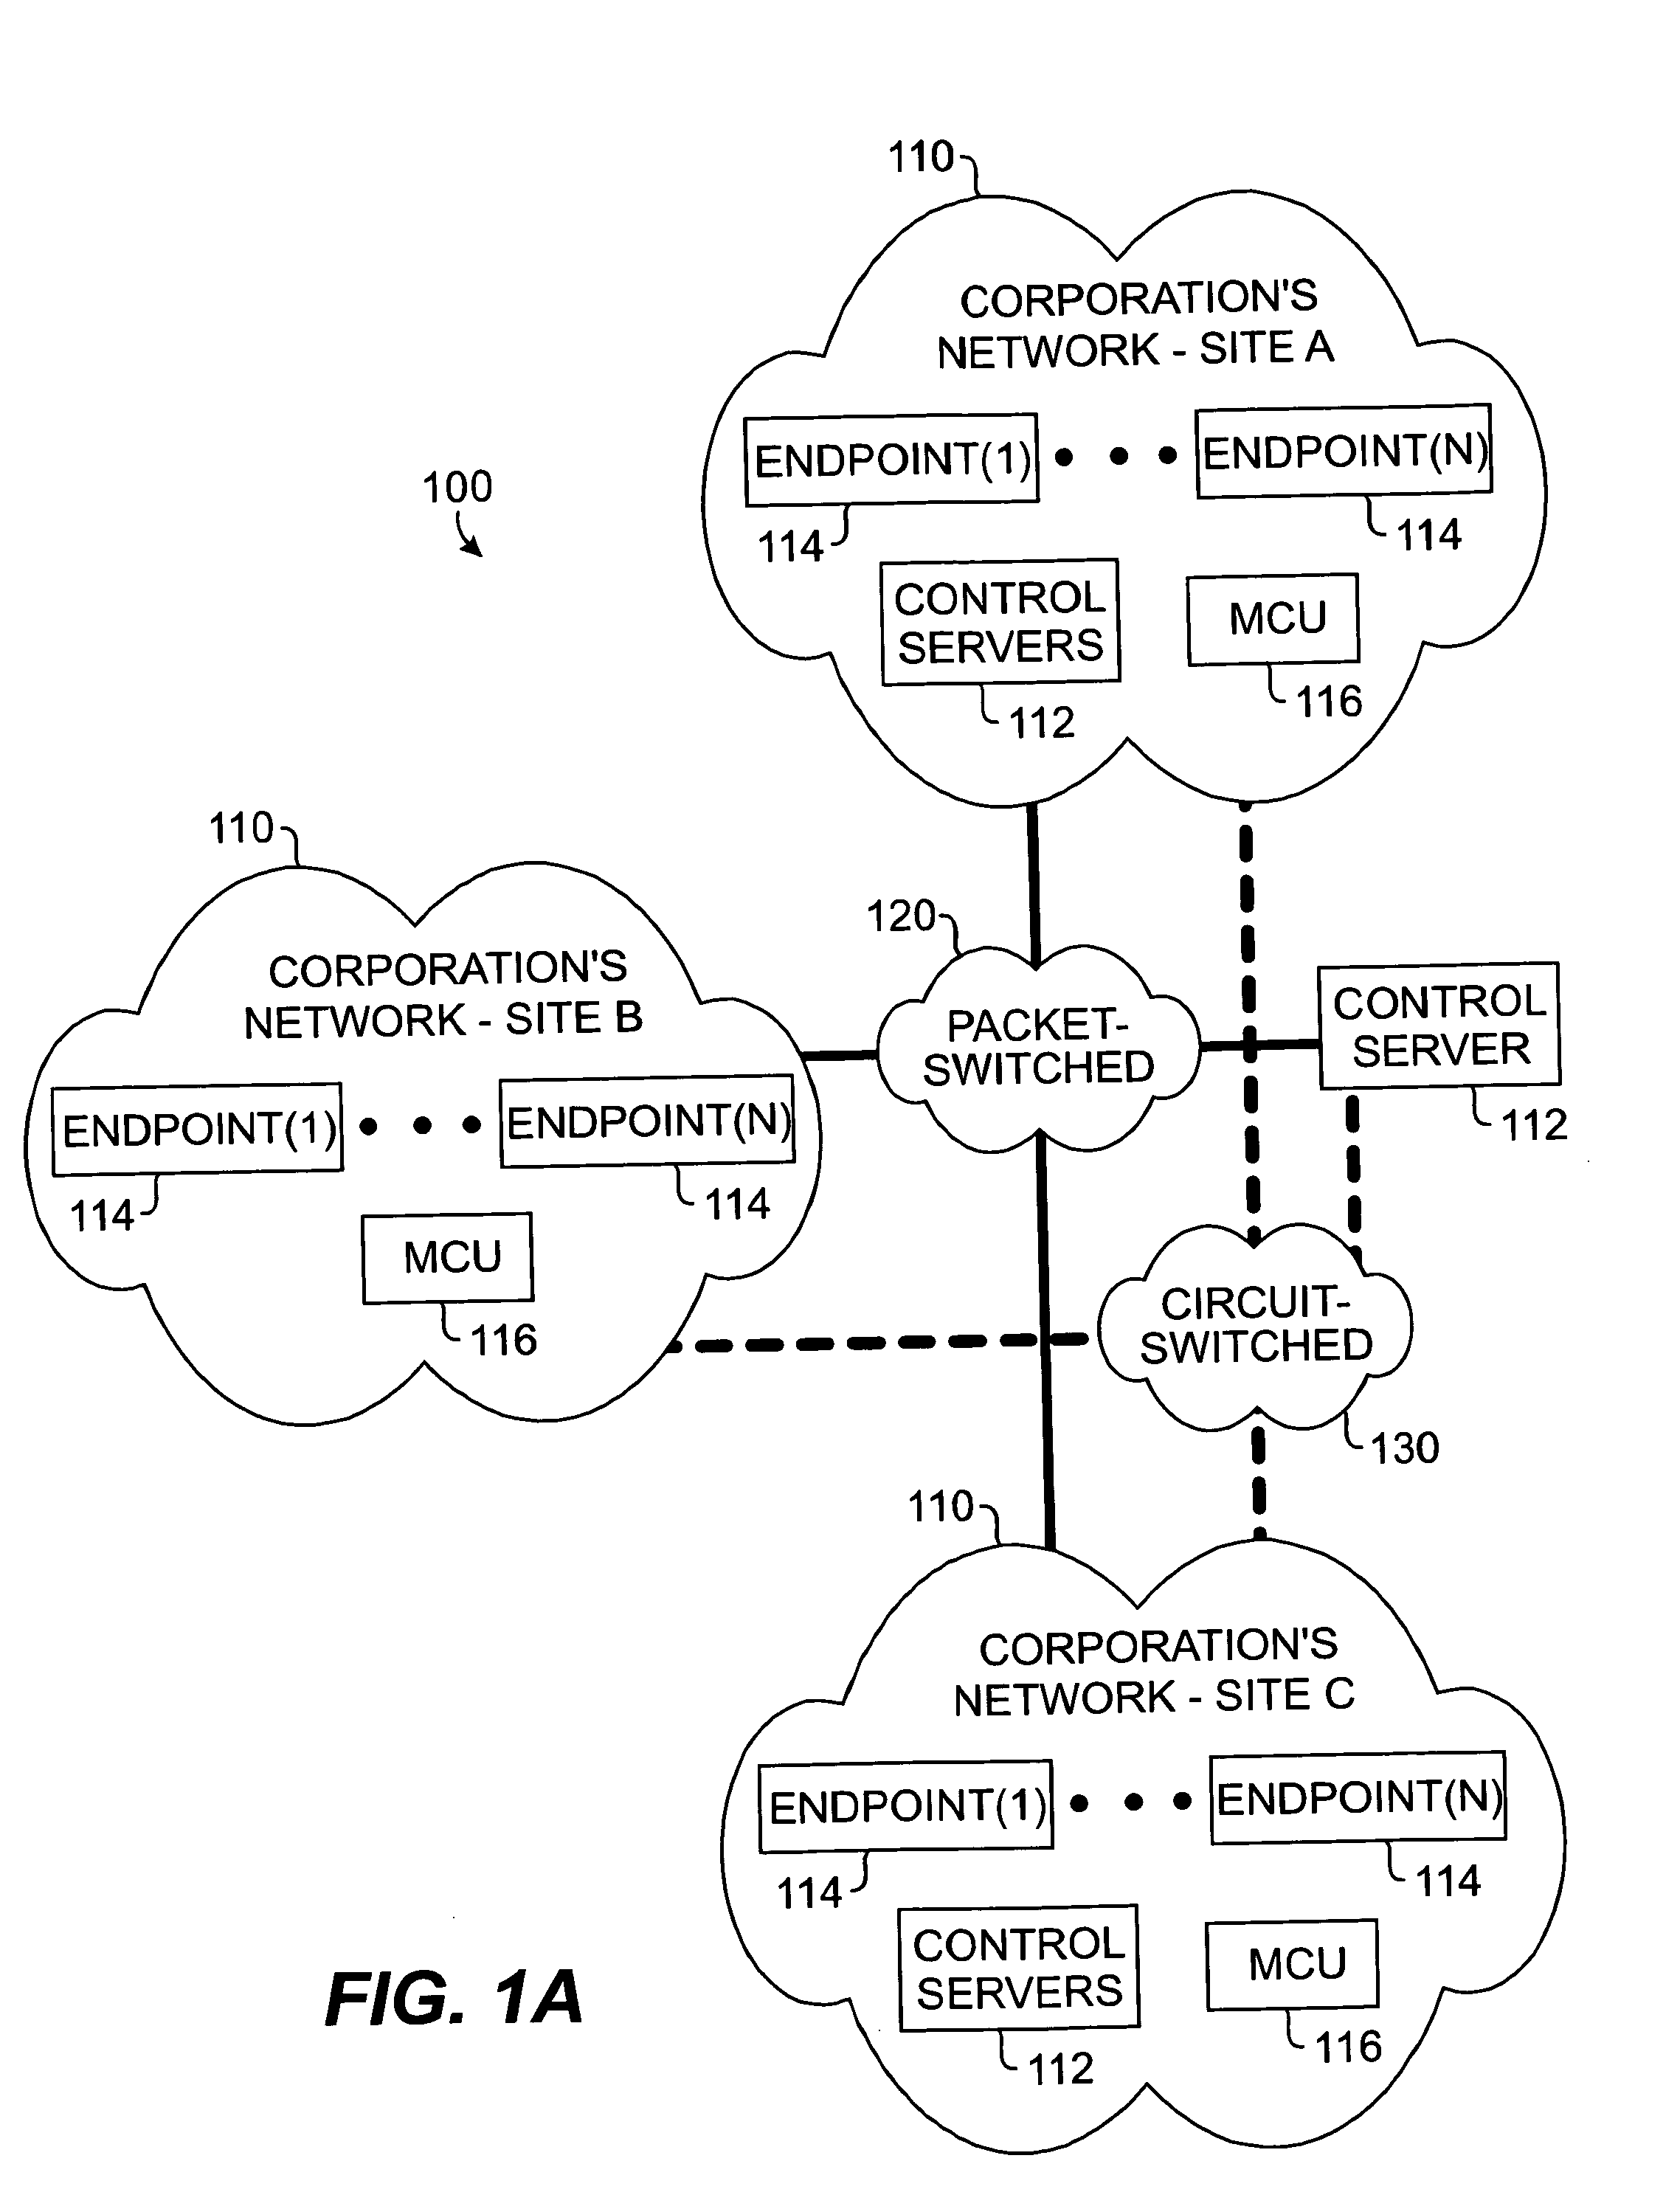 Multi-site conferencing system and method